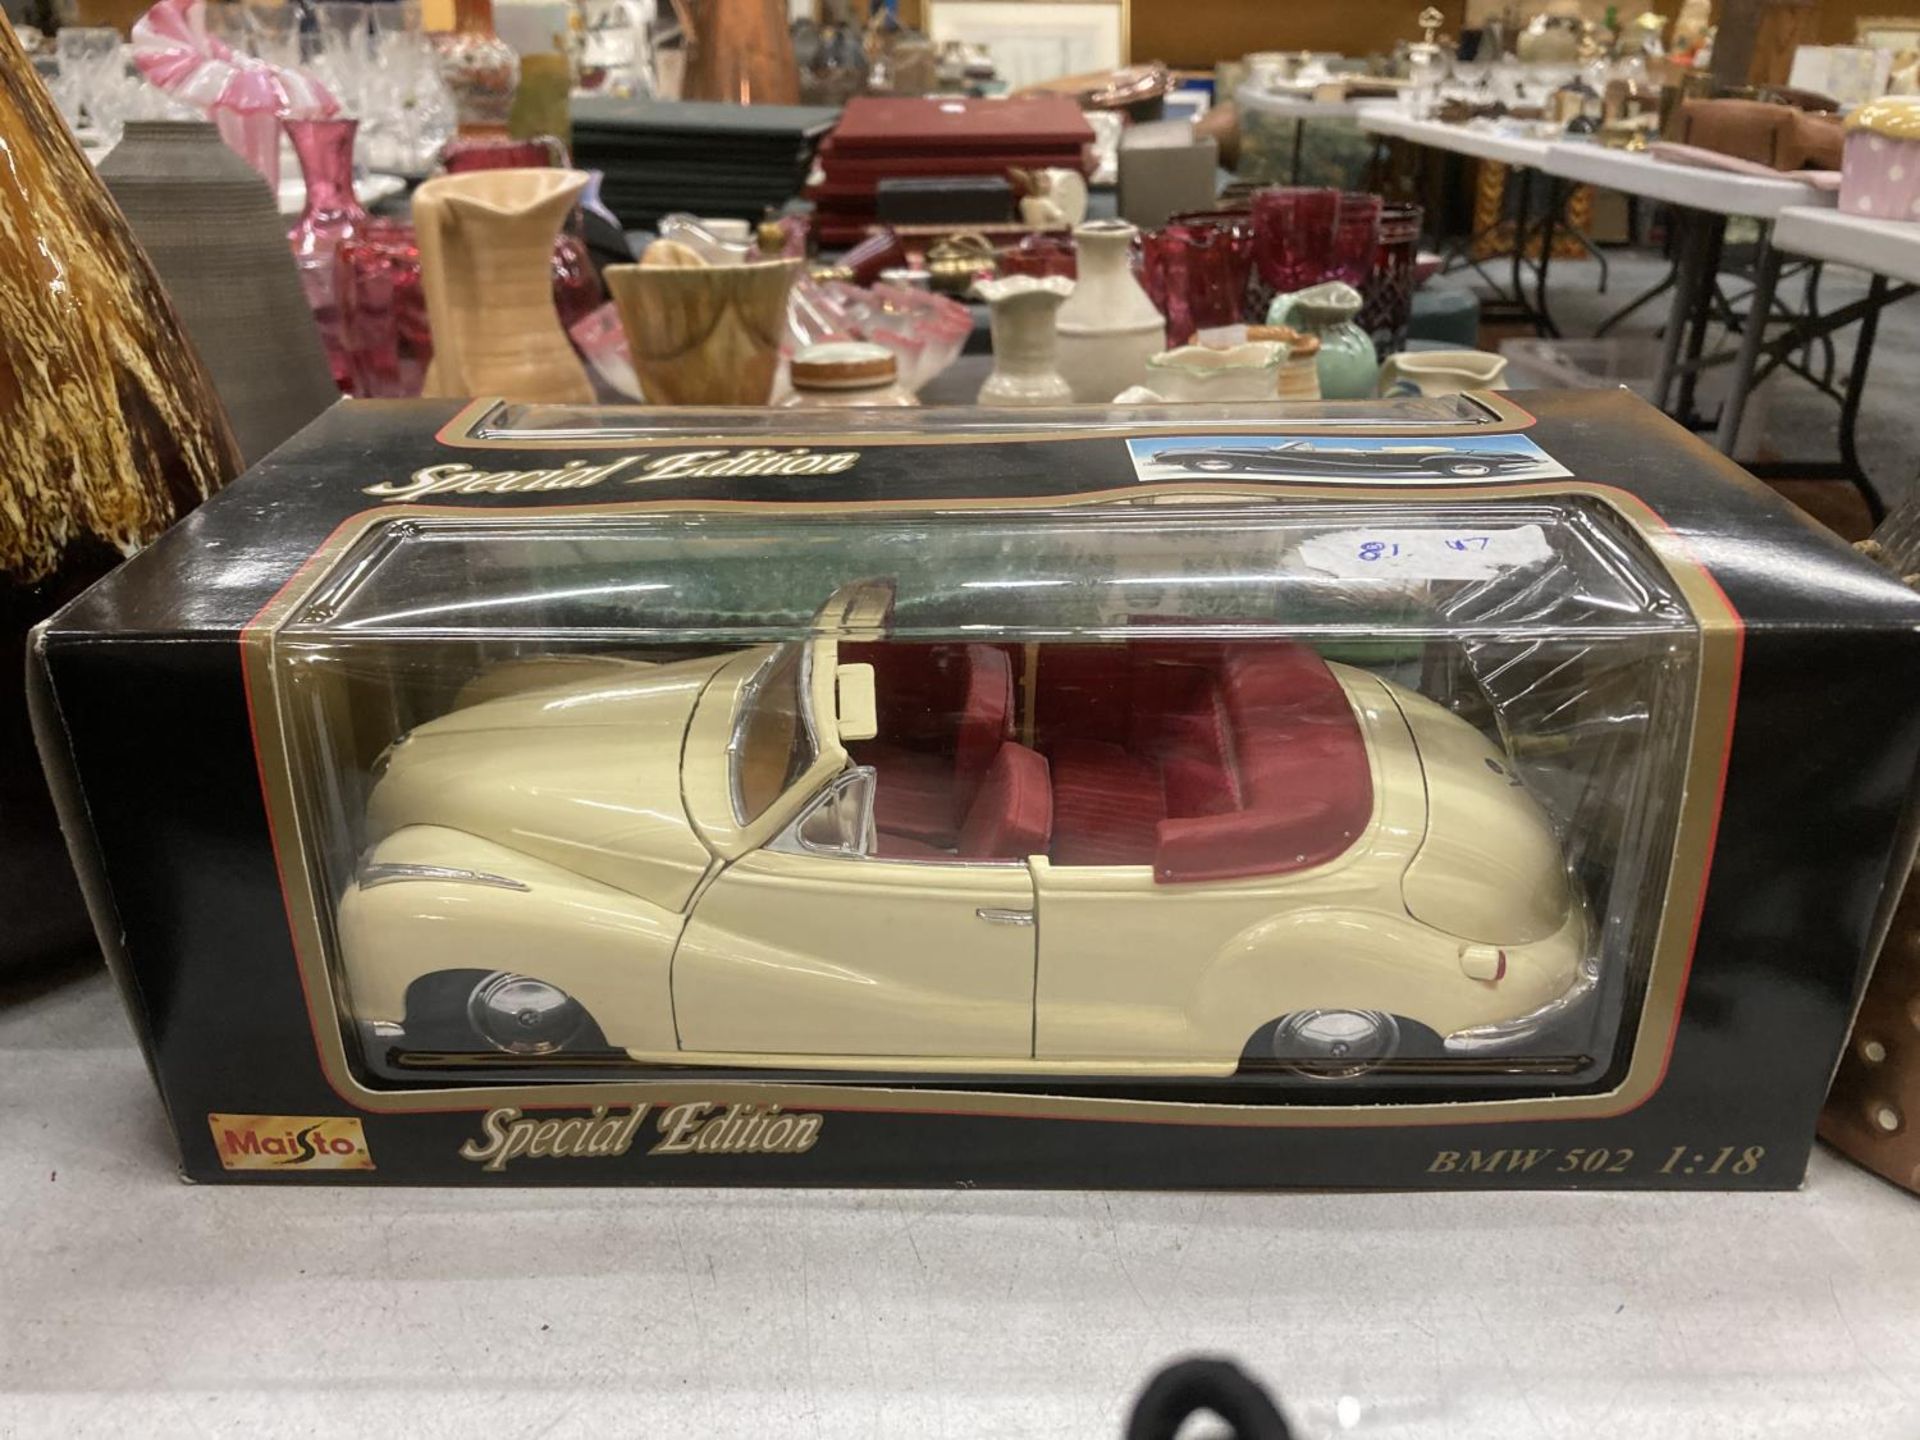 A BOXED MAISTO SPECIAL EDITION 1:18 SCALE BMW 502